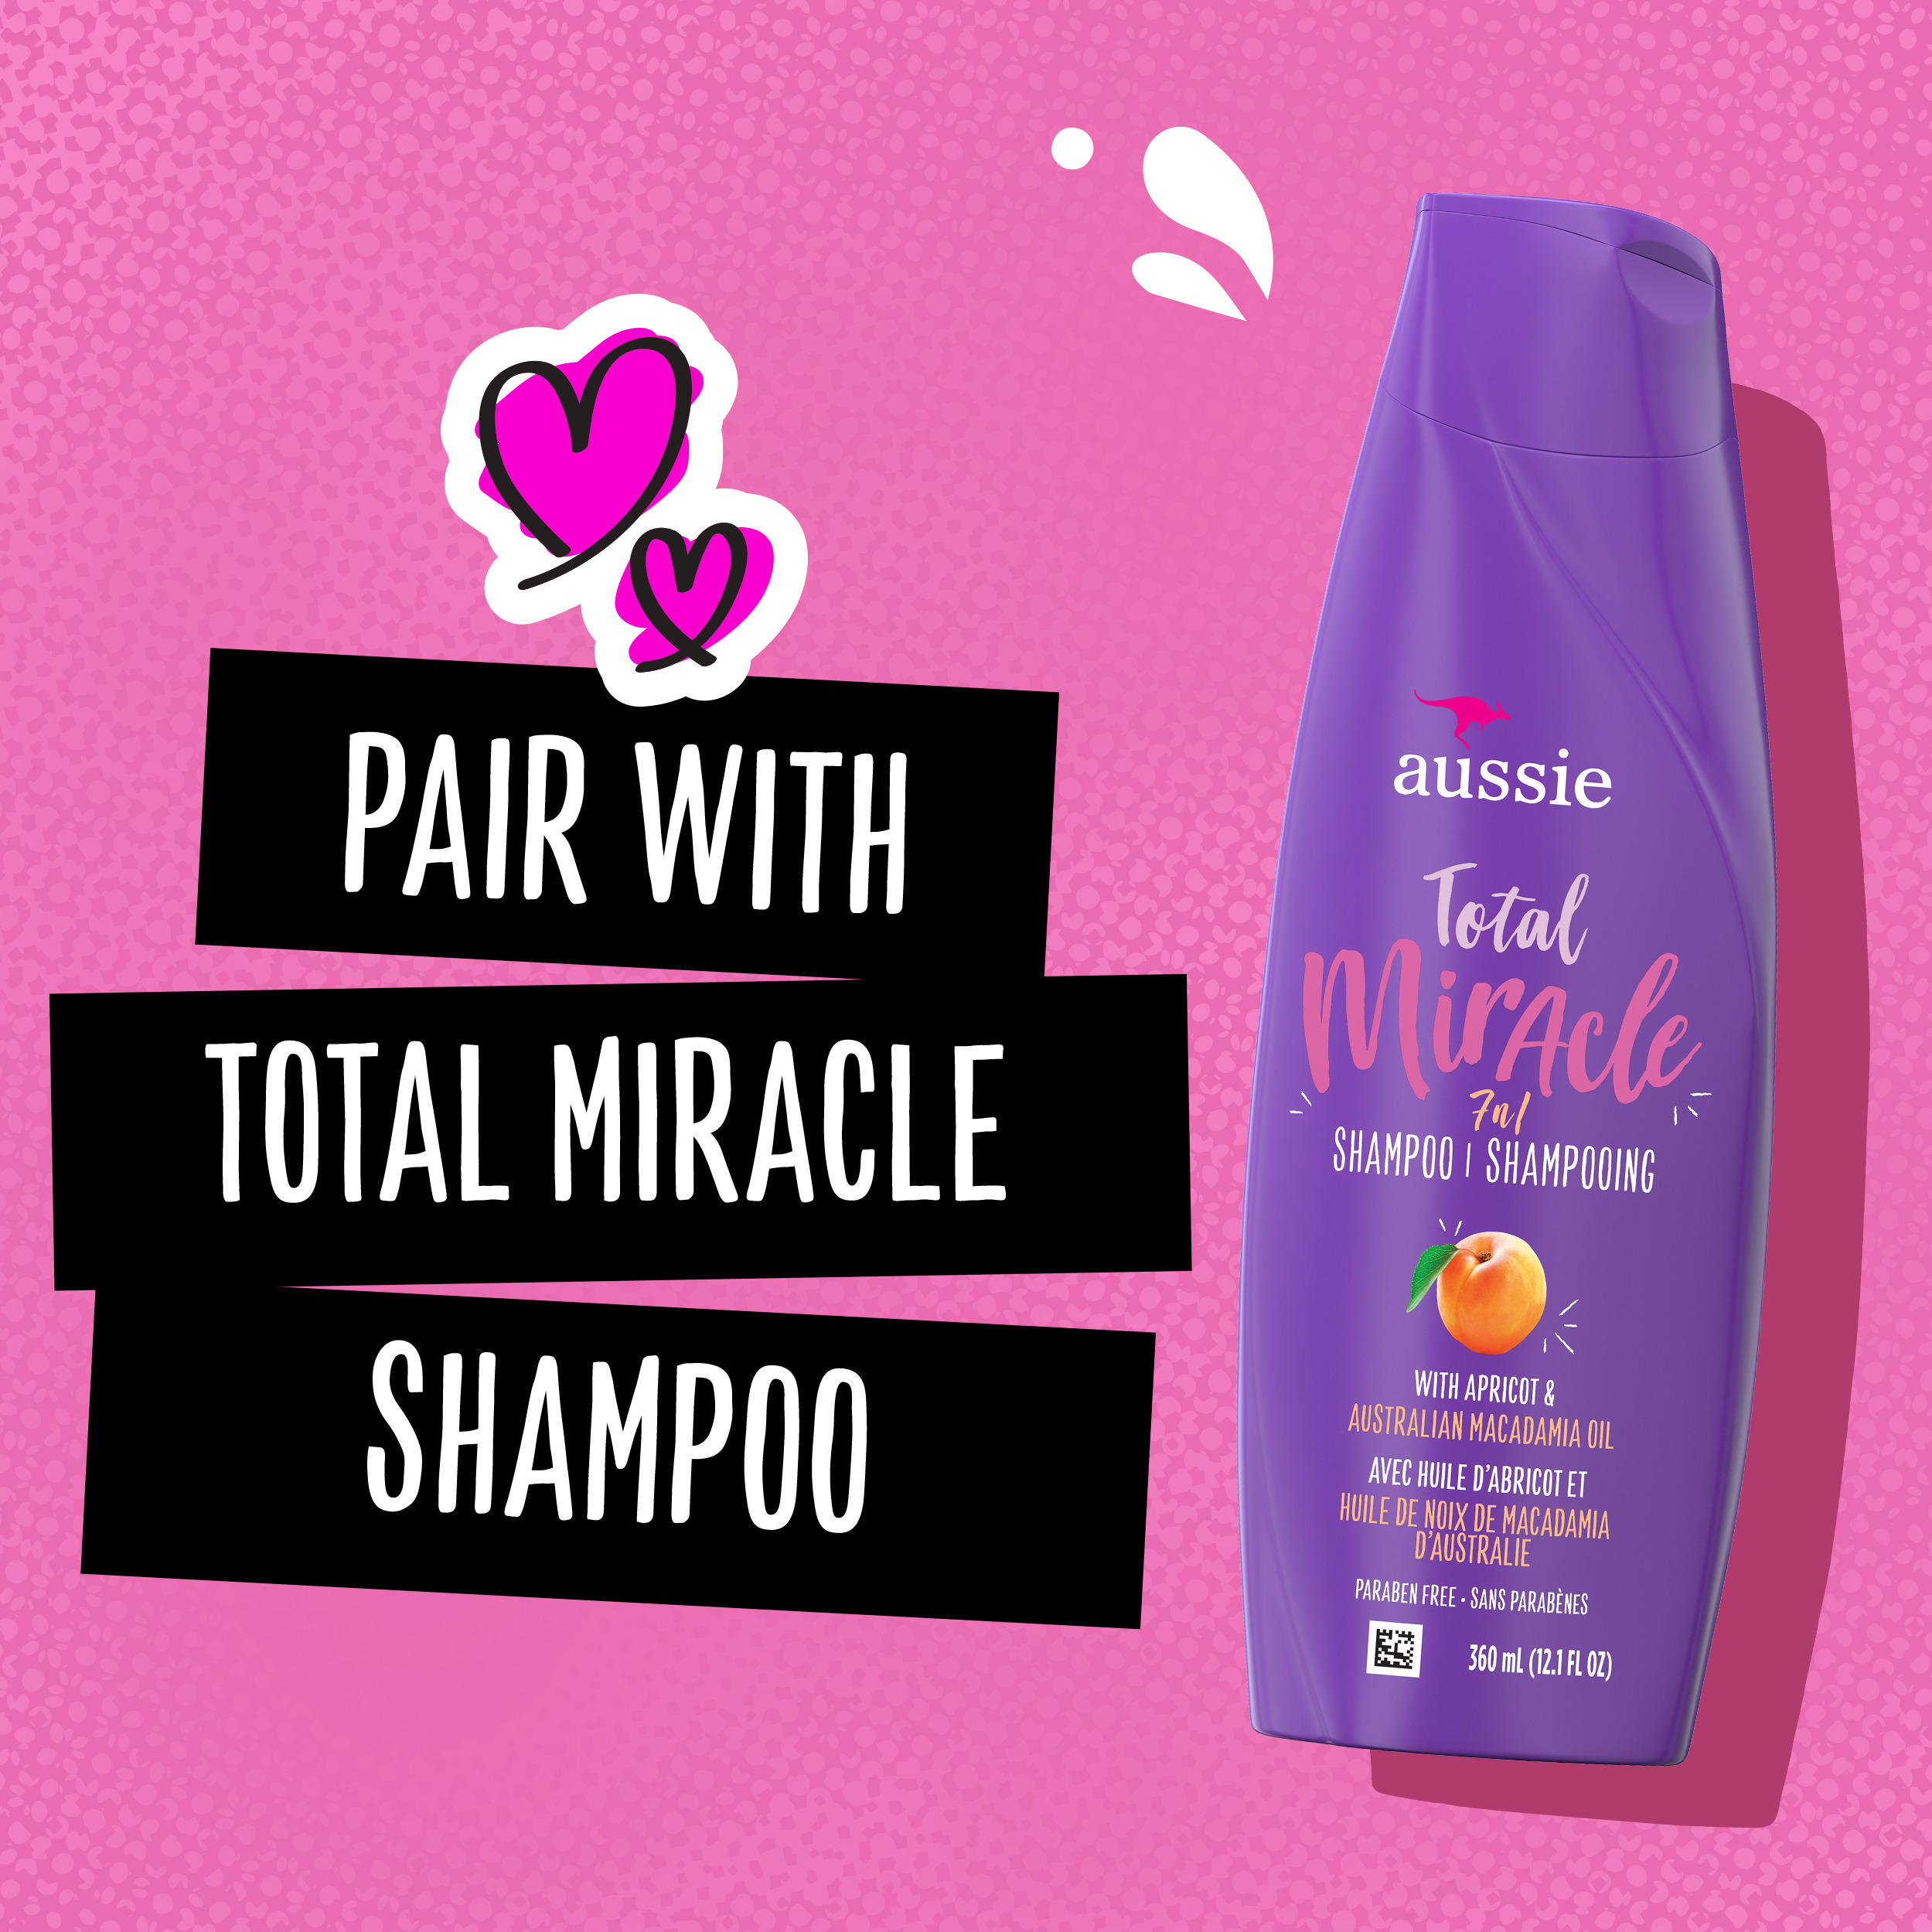 Aussie Total Miracle Conditioner for Damaged Hair, 12.1 fl oz - image 5 of 9